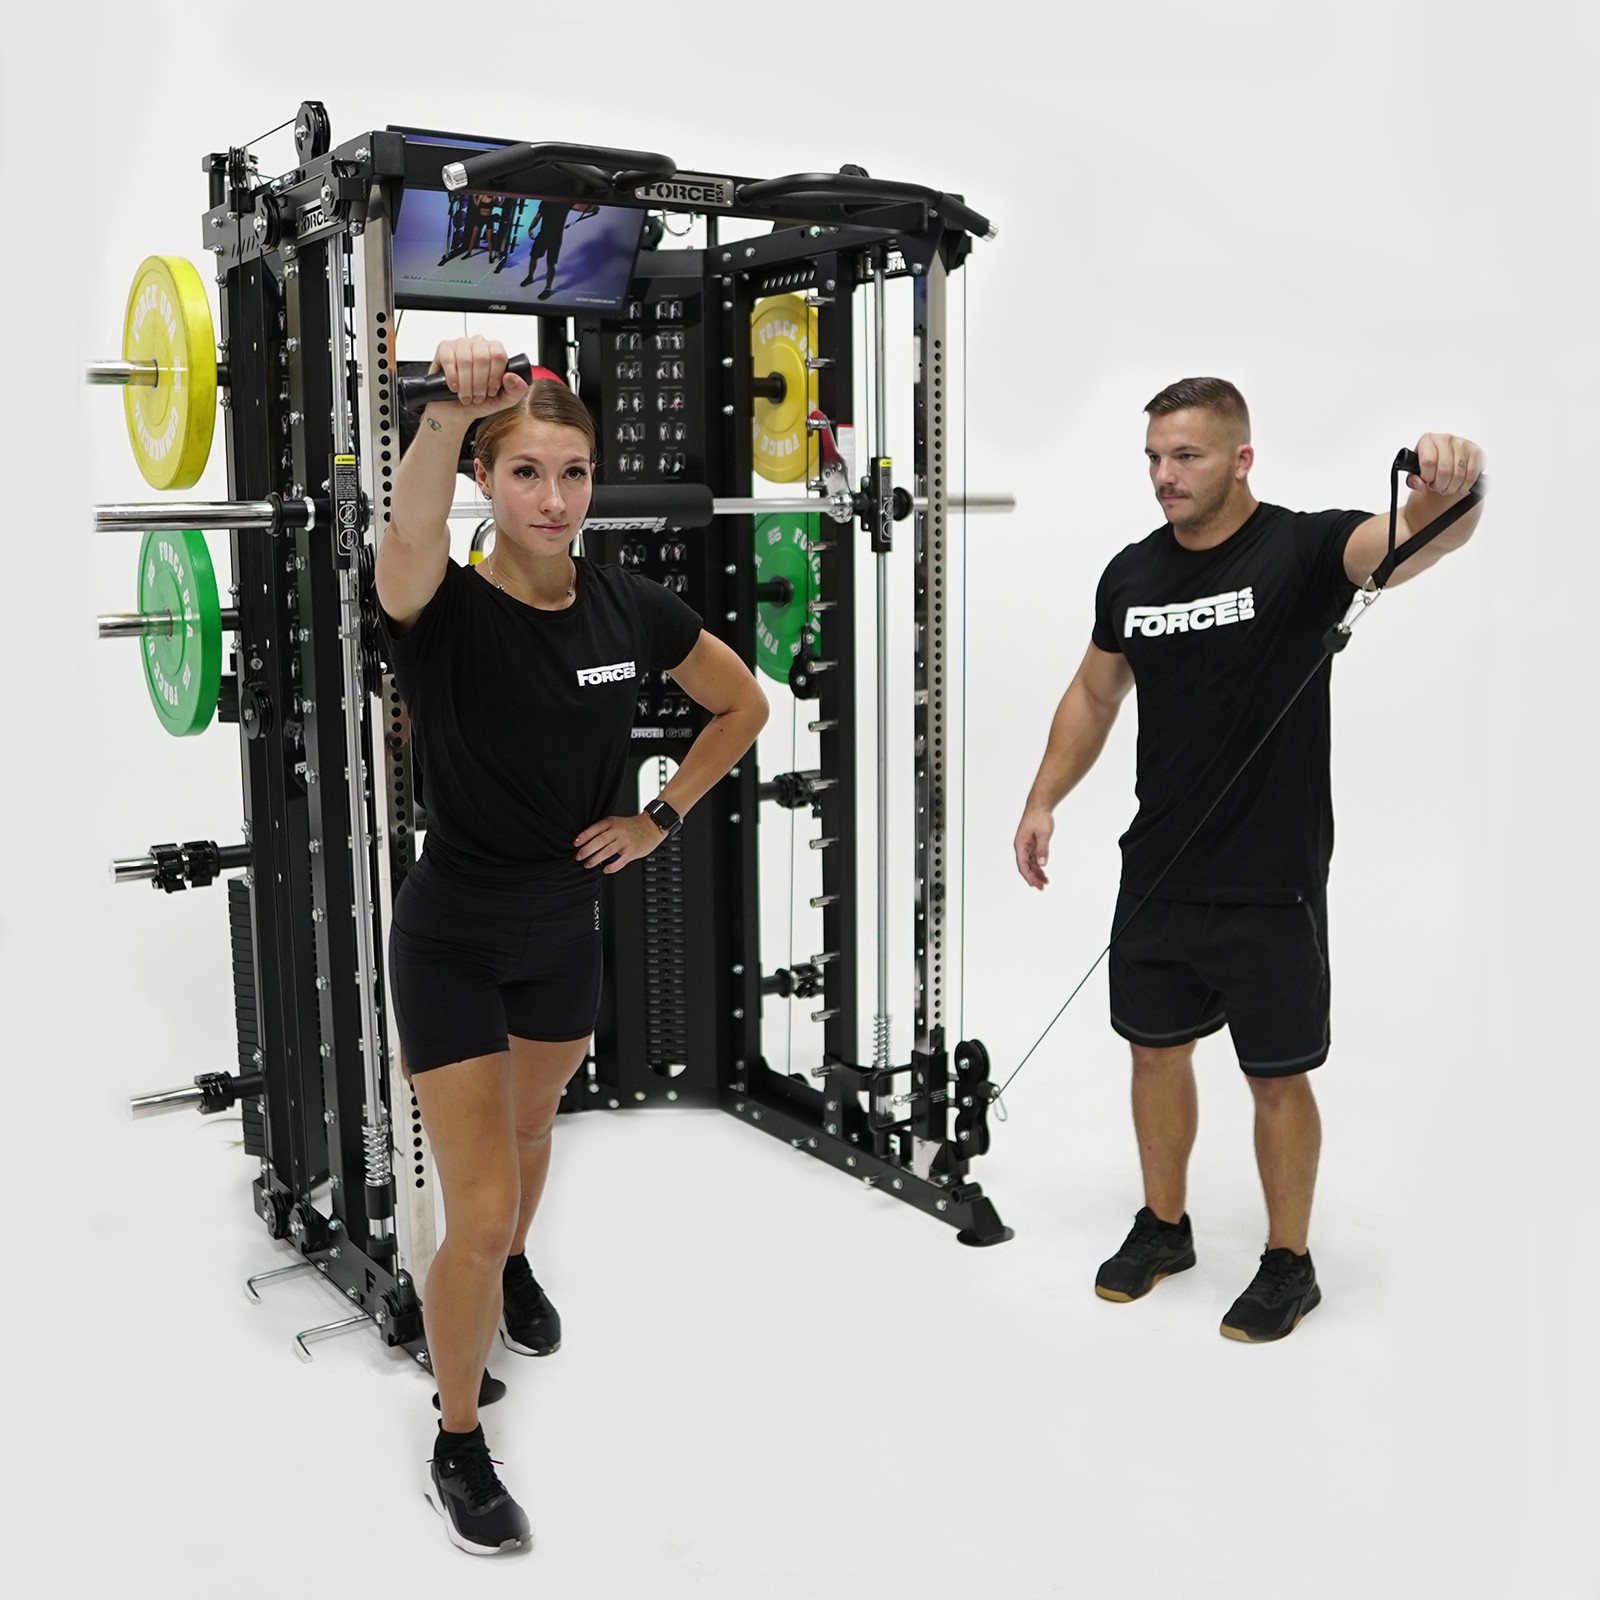 functional trainer in use